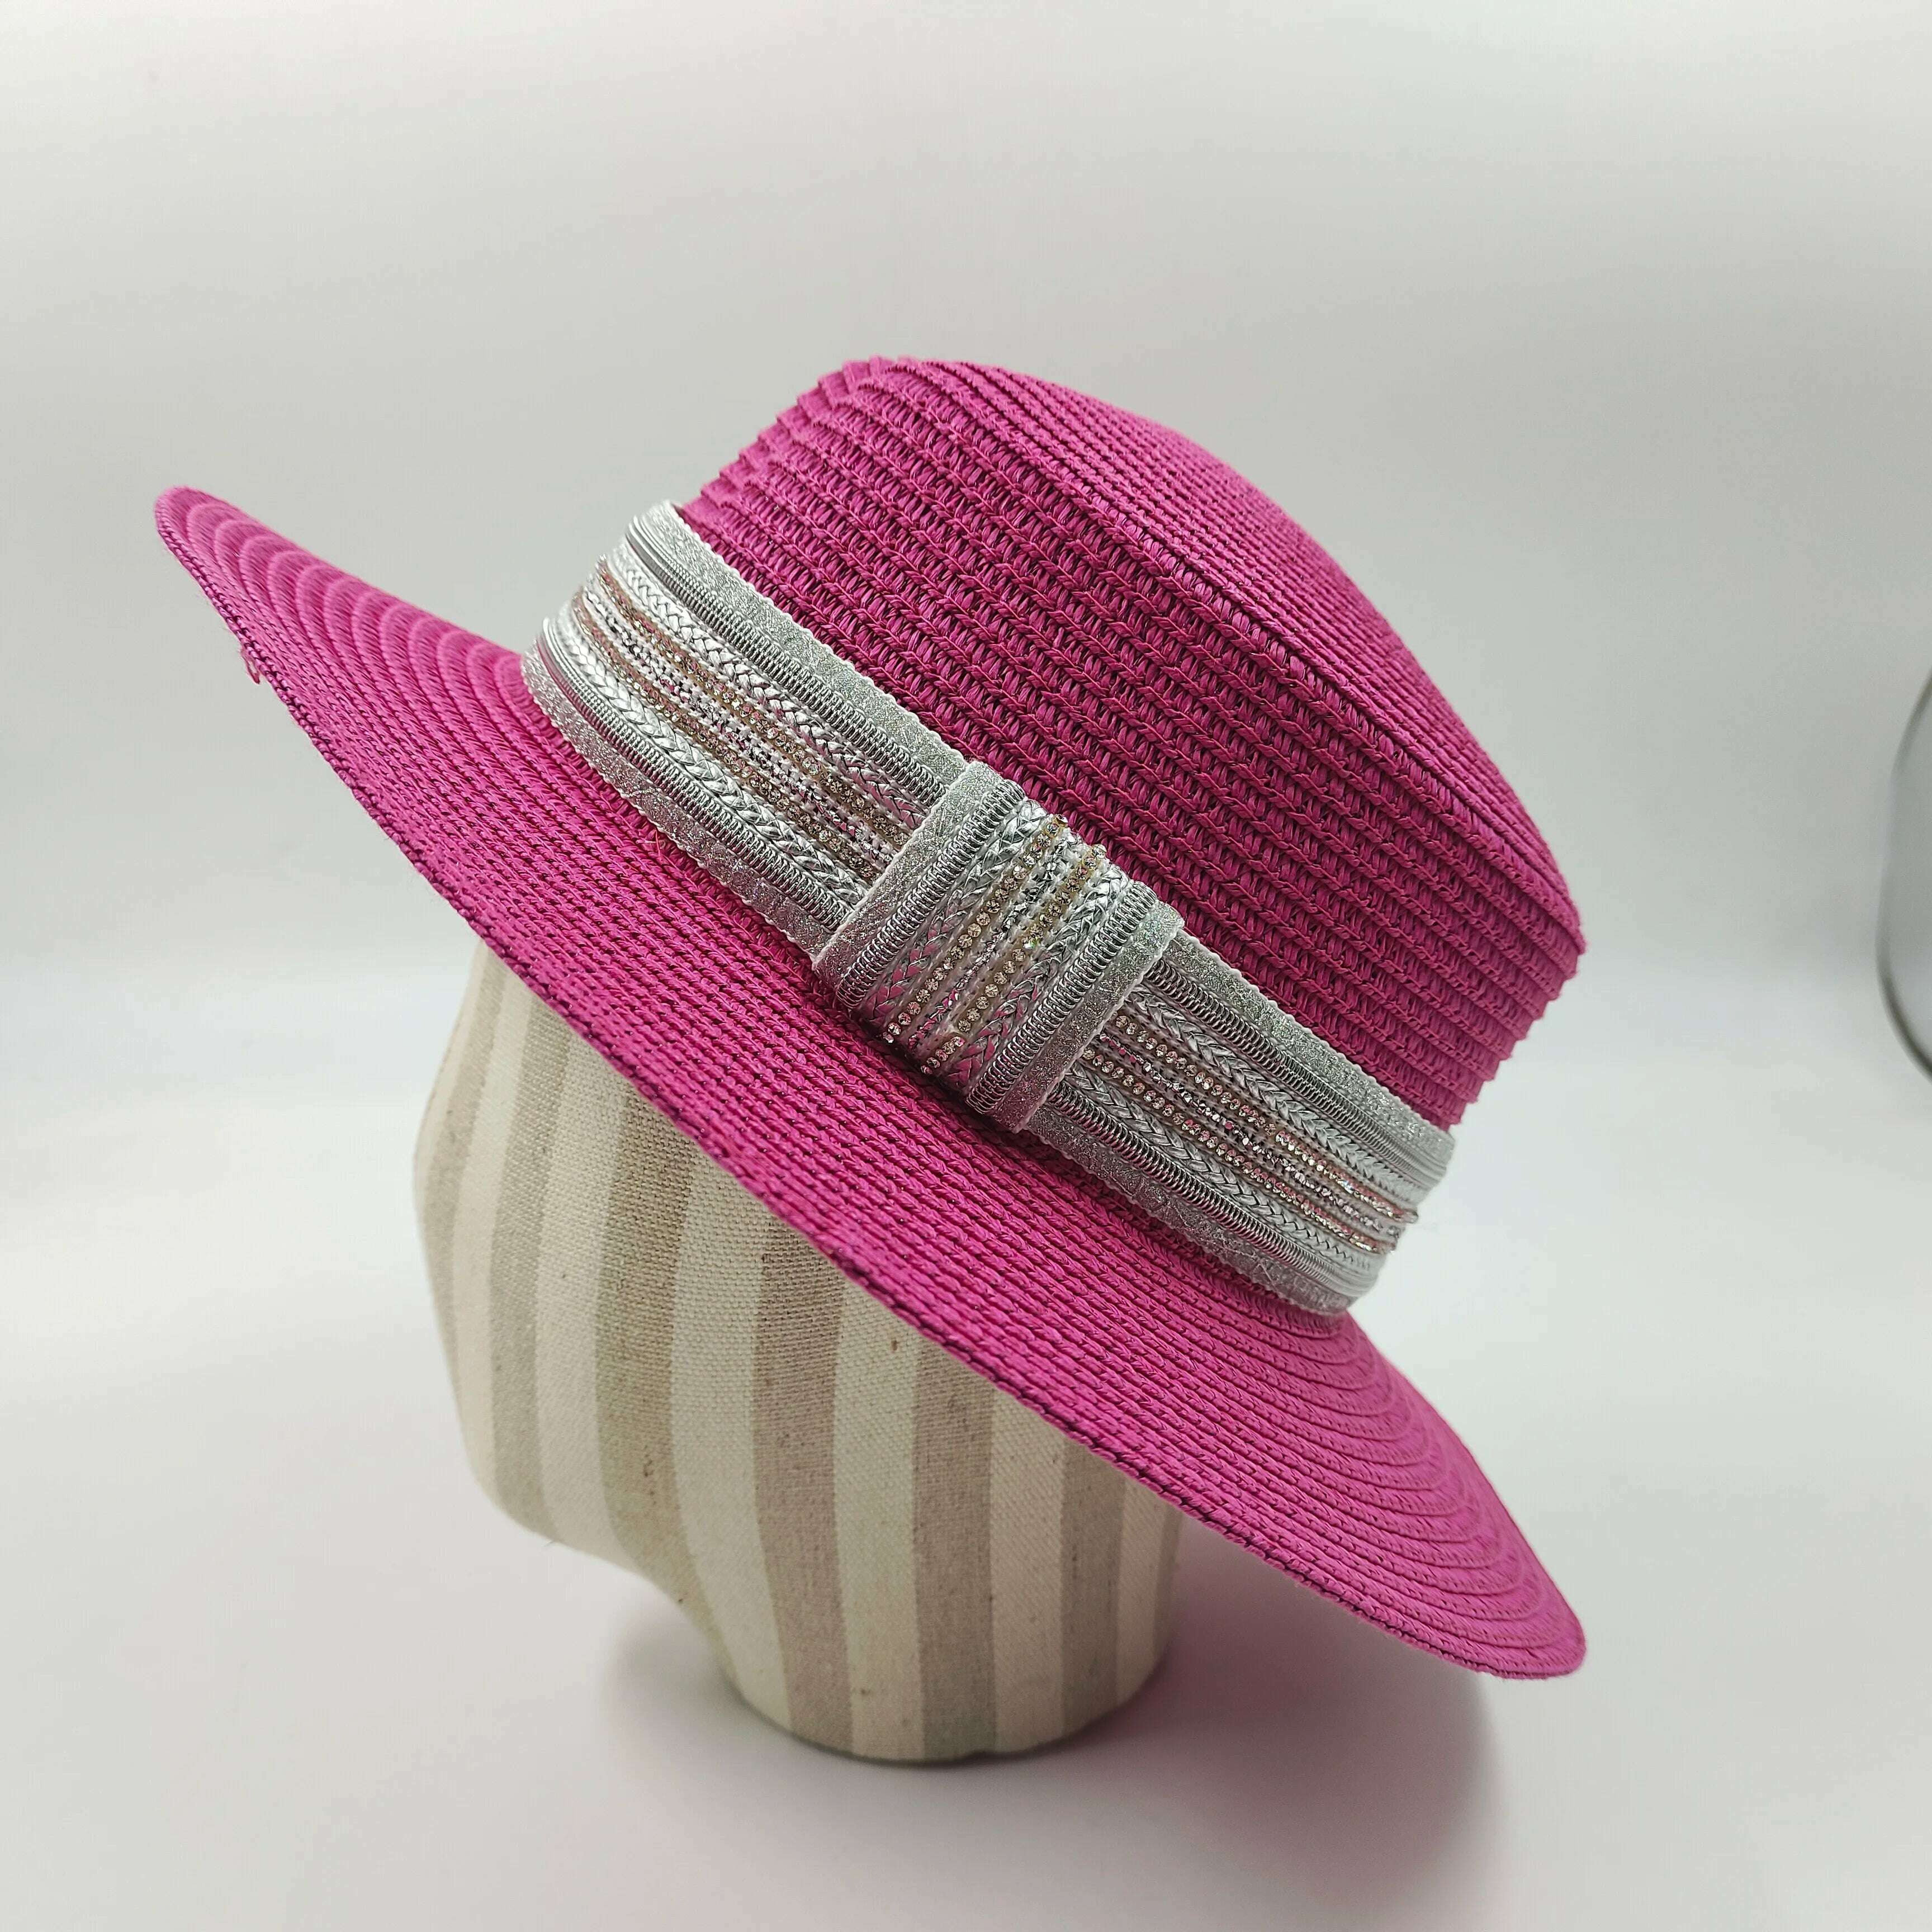 KIMLUD, women straw hat  Flat Top Straw Hat Vacation Casual Shopping Beach Hats for Woman Hats for girls Church Courtesy Panama Sun Hat, 48 / M 56-58CM, KIMLUD Womens Clothes